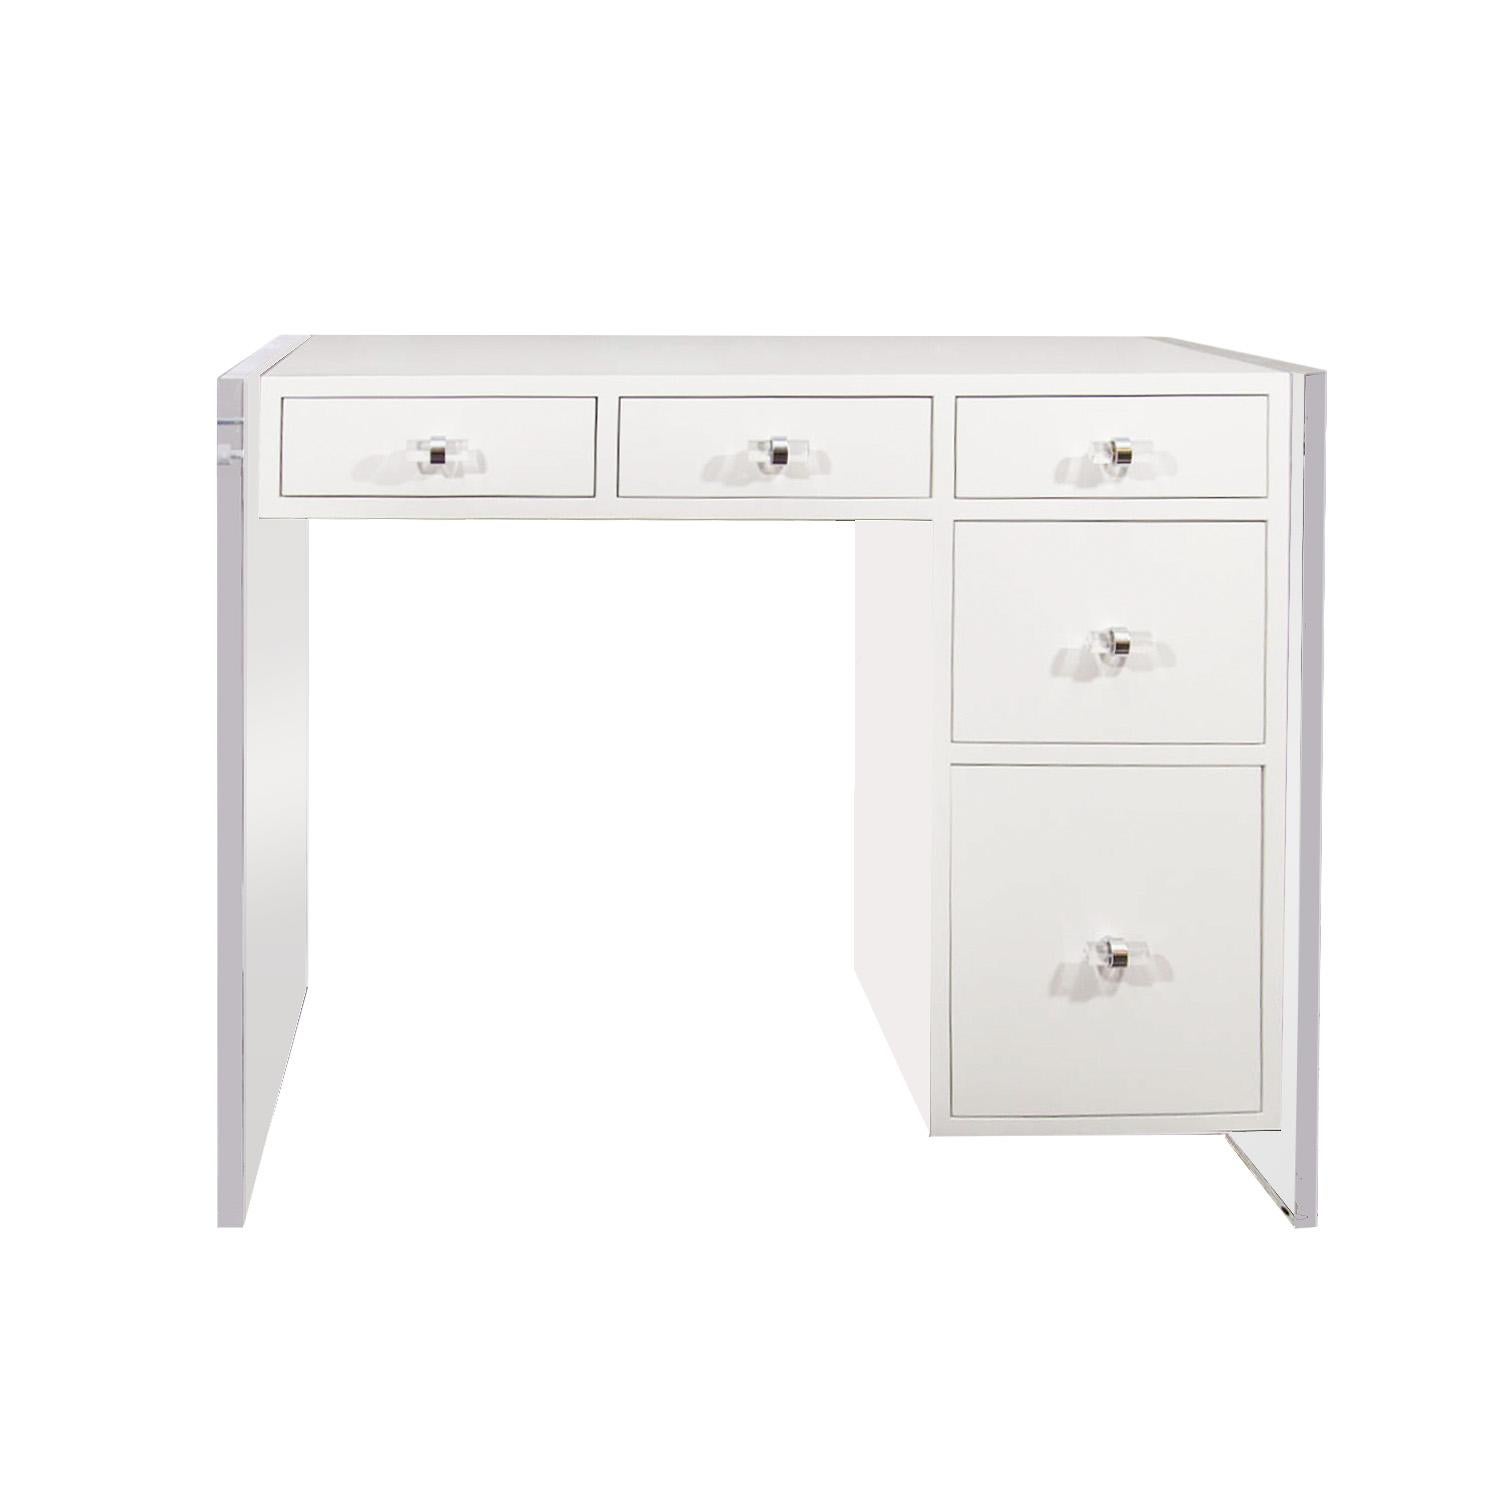 Made to order, custom white lacquer desk with Lucite side panel supports an pulls in Lucite and chrome. Drawer interiors are finished in spray lacquer. Custom dimensions and finishes are available. Please inquire with Venfield for custom orders. 

